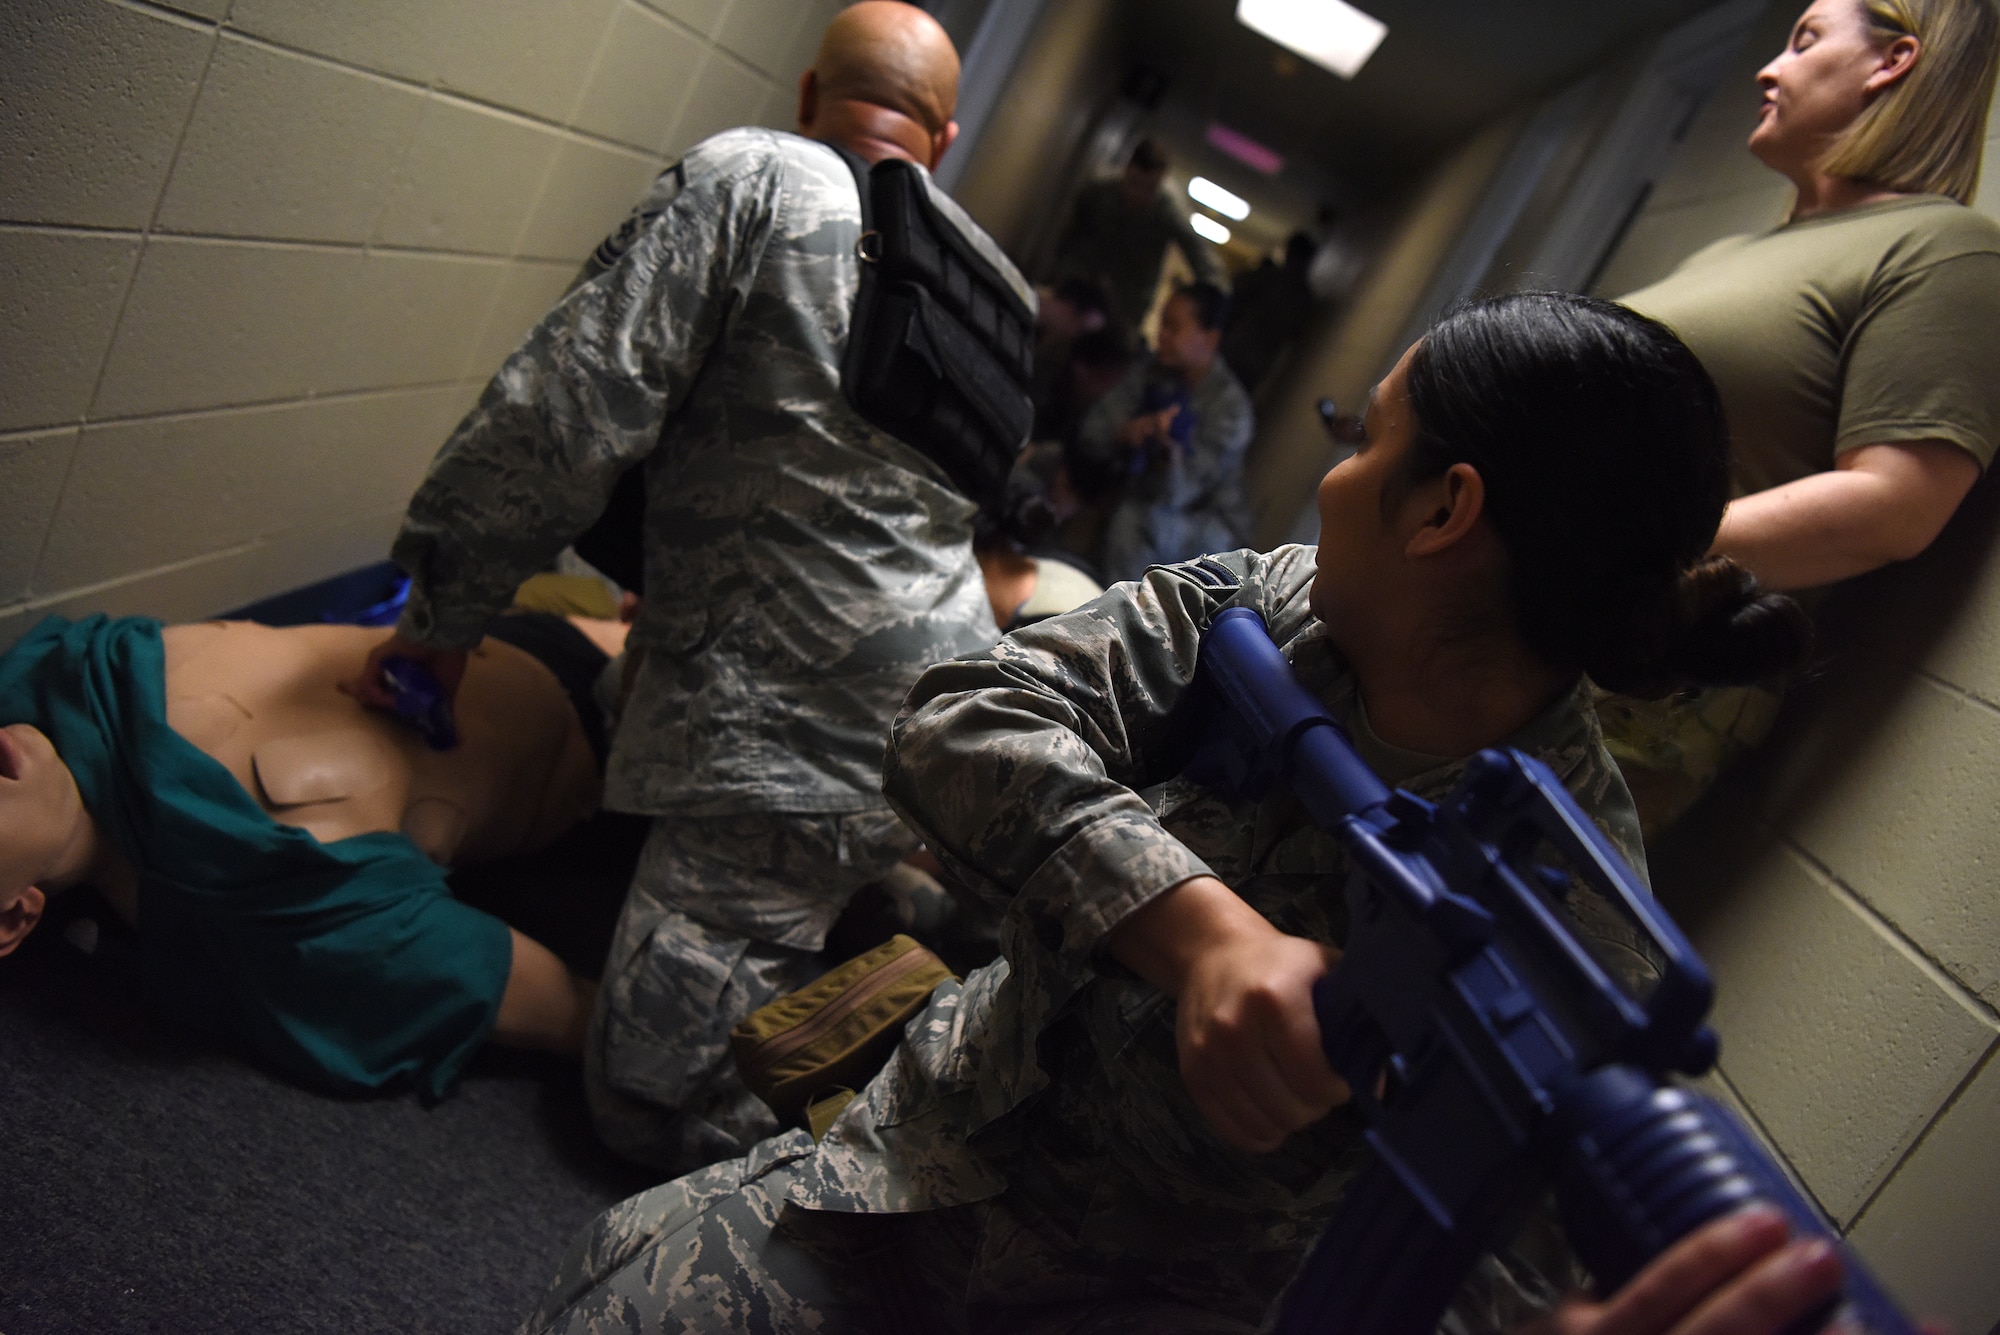 Tactical Combat Casualty Course students perform their final evaluation inside the Locker House at Keesler Air Force Base, Mississippi, Feb. 20, 2020. The TCCC is replacing self-aid and buddy care to better prepare medics for deployed environments. (U.S. Air Force photo by Senior Airman Suzie Plotnikov)